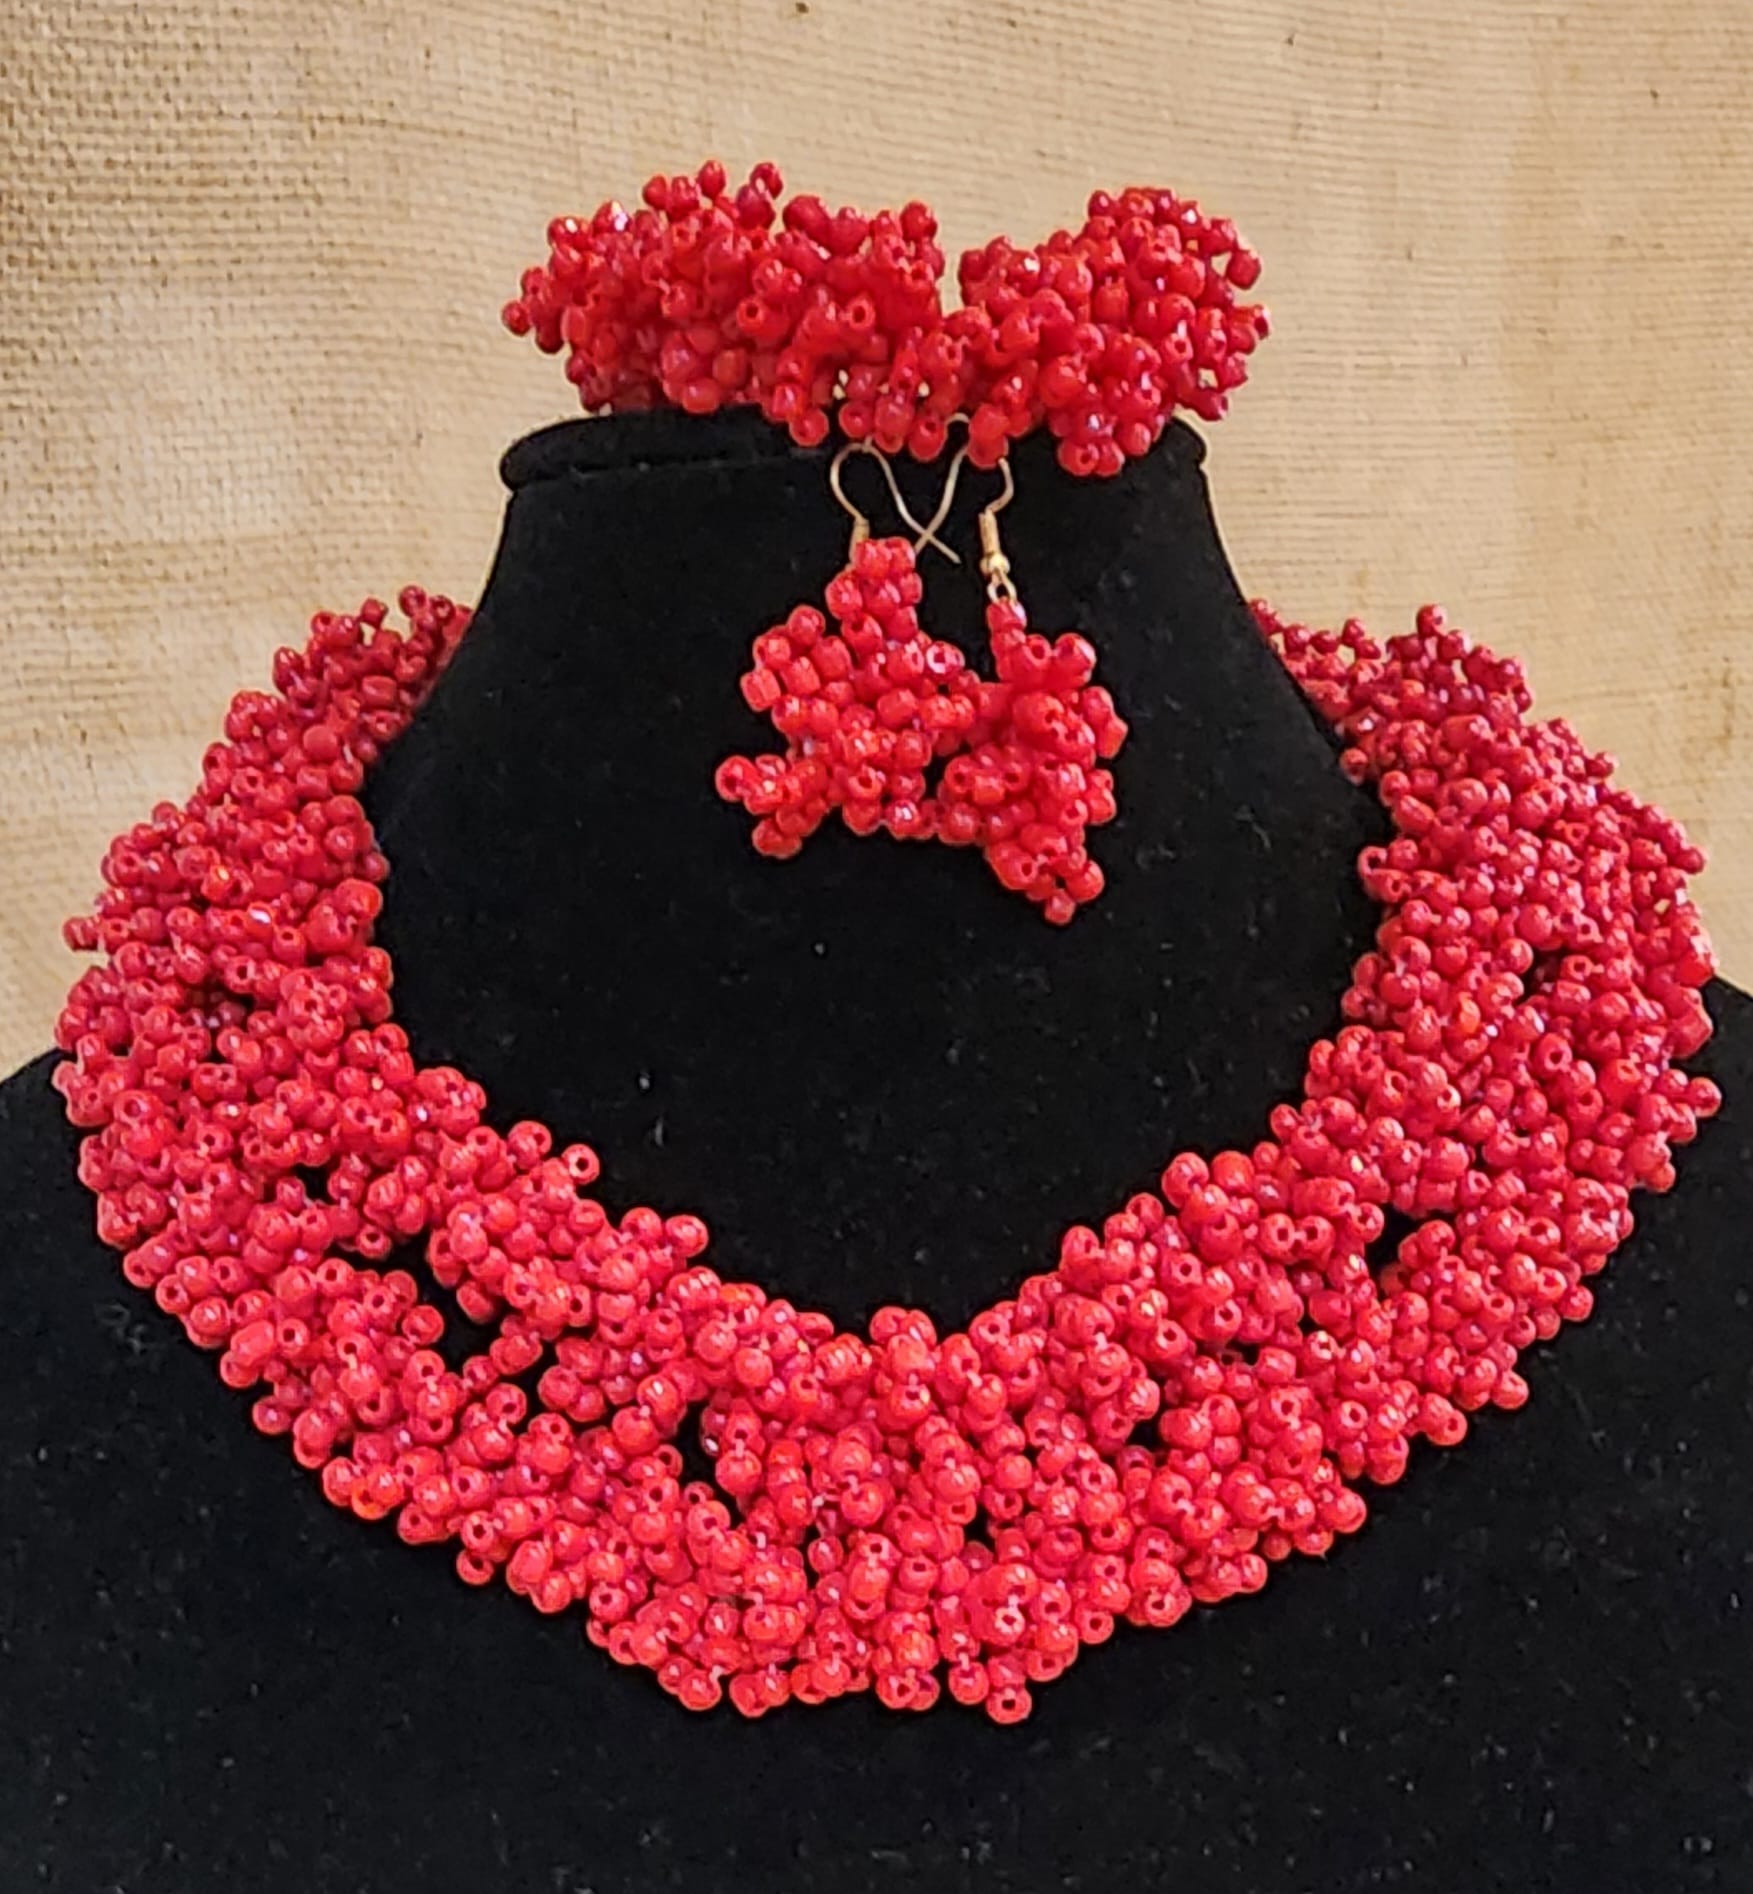 Big and bold red handmade beautiful seed beads necklace set